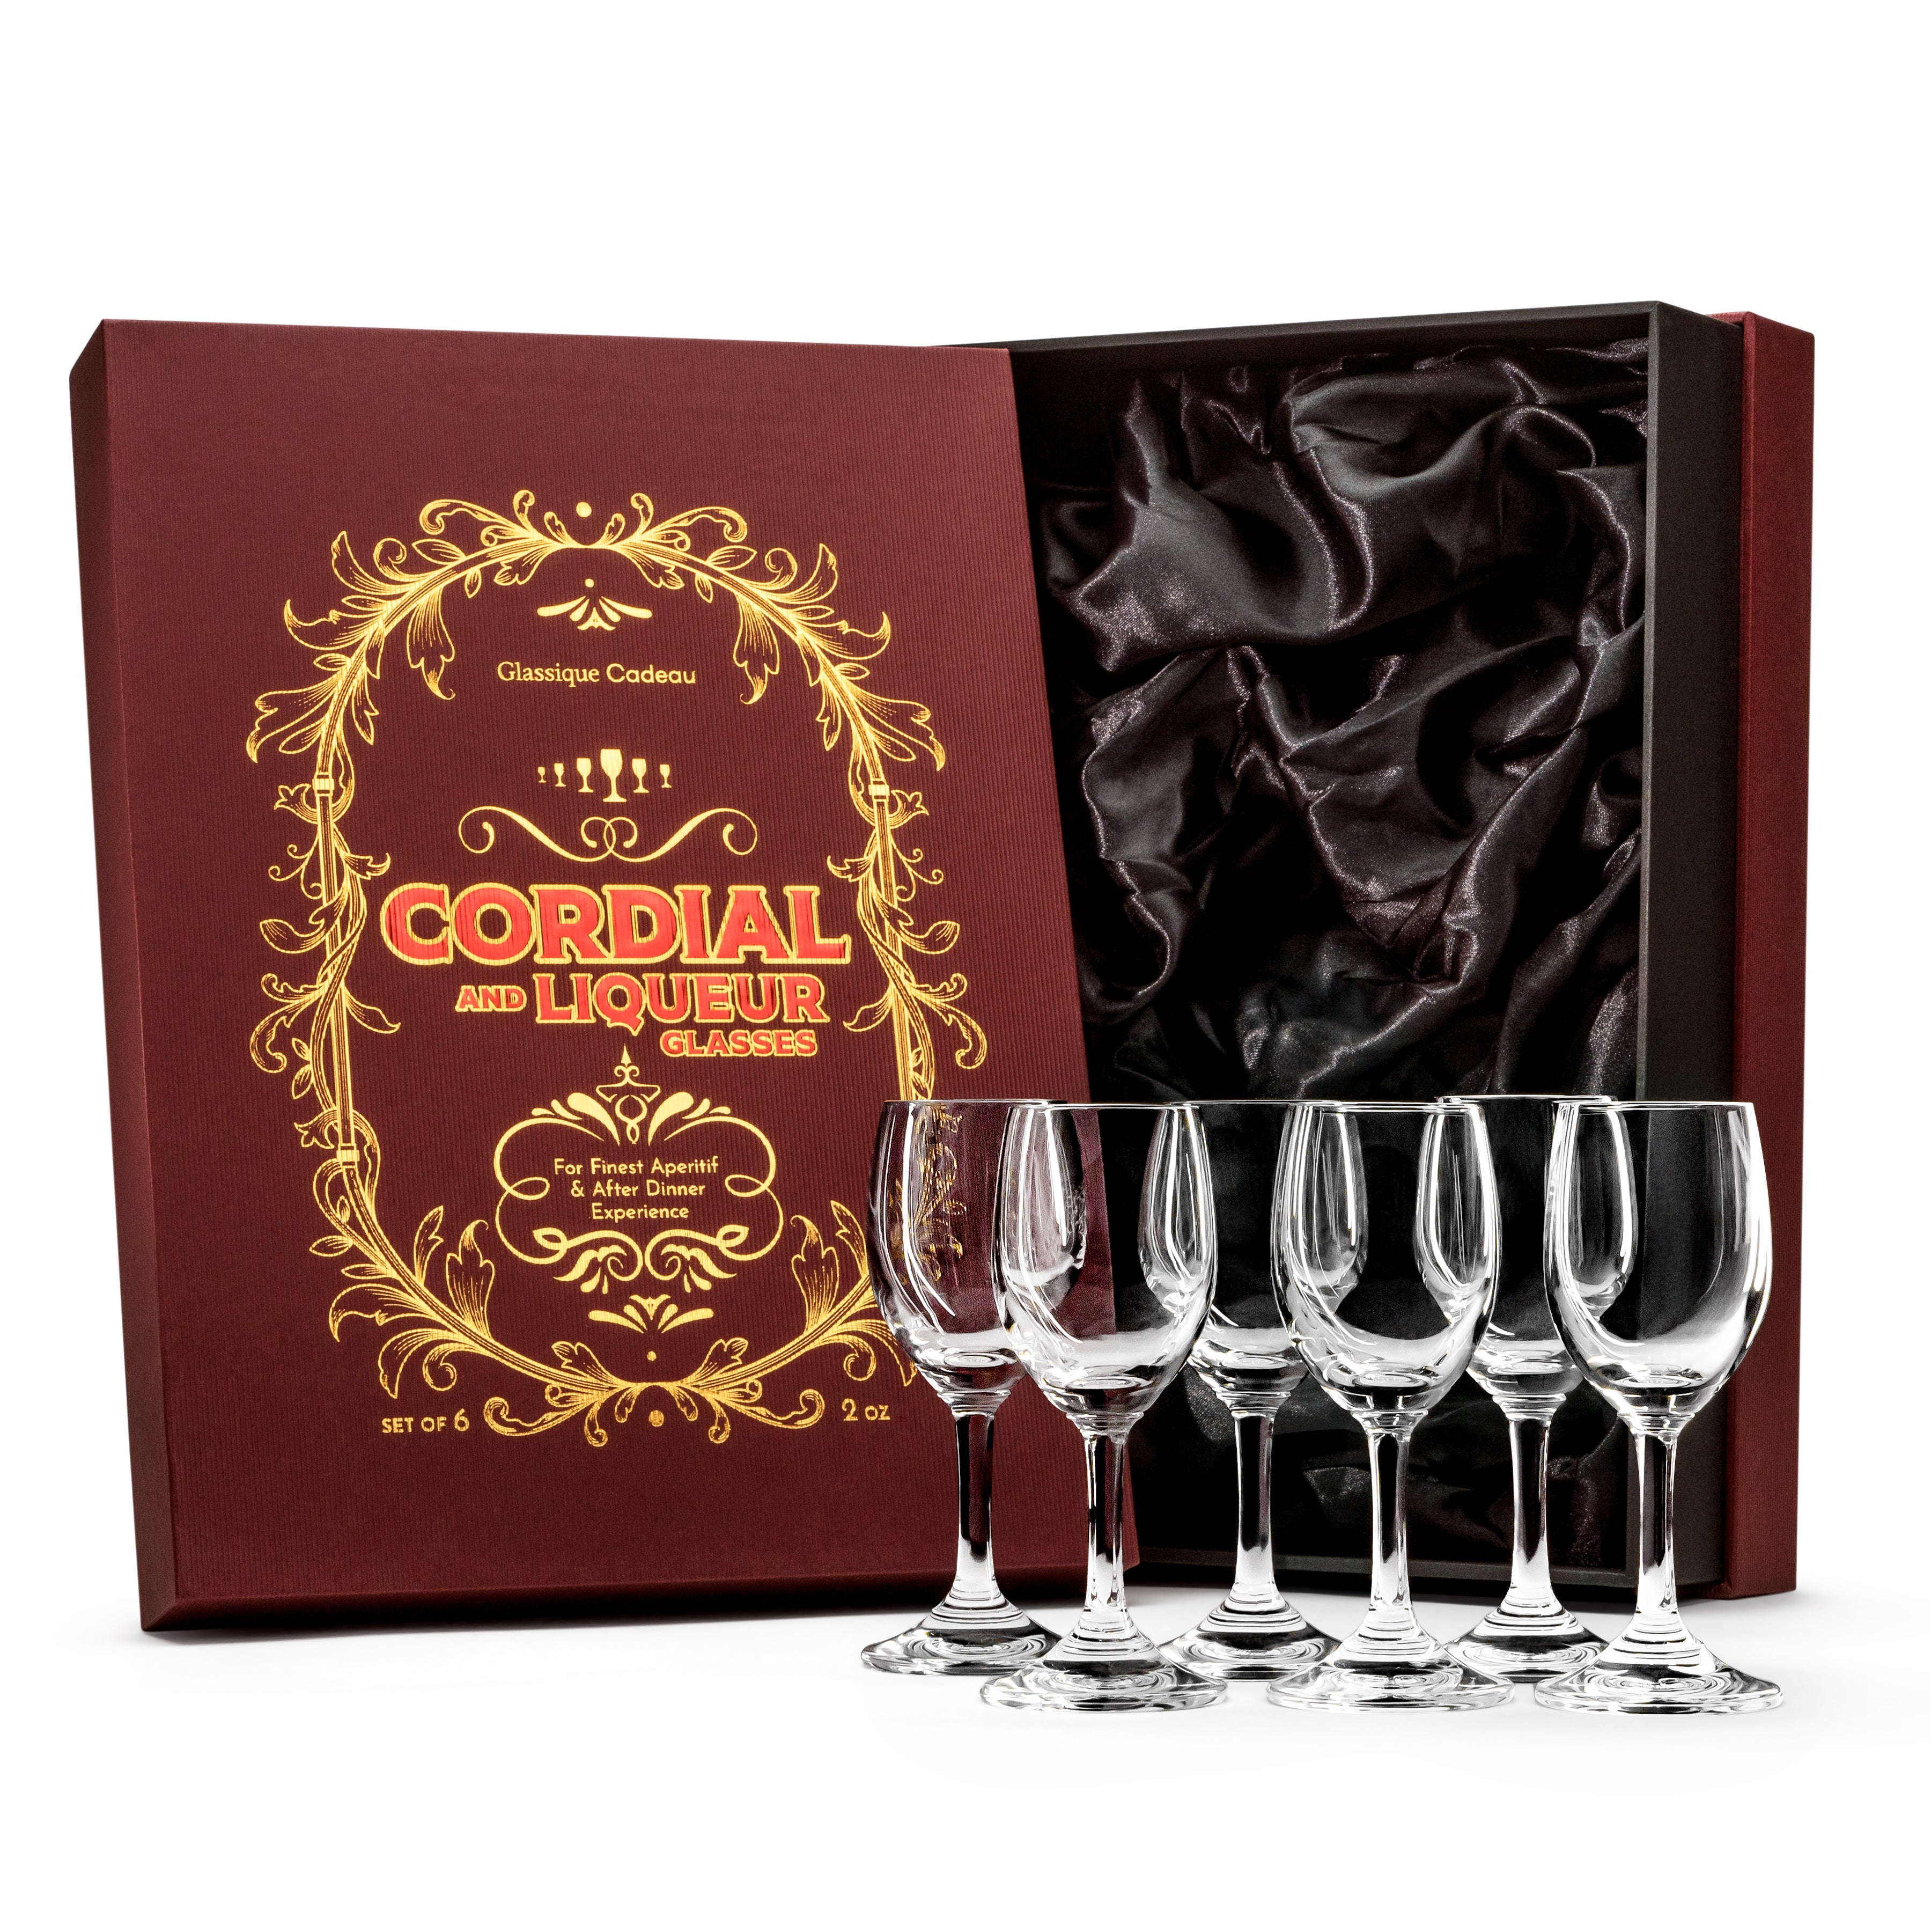  GLASSIQUE CADEAU Port and Dessert Wine, Sherry, Cordial,  Aperitif Tasting Glasses, Set of 4 Small Crystal 7 oz Sippers